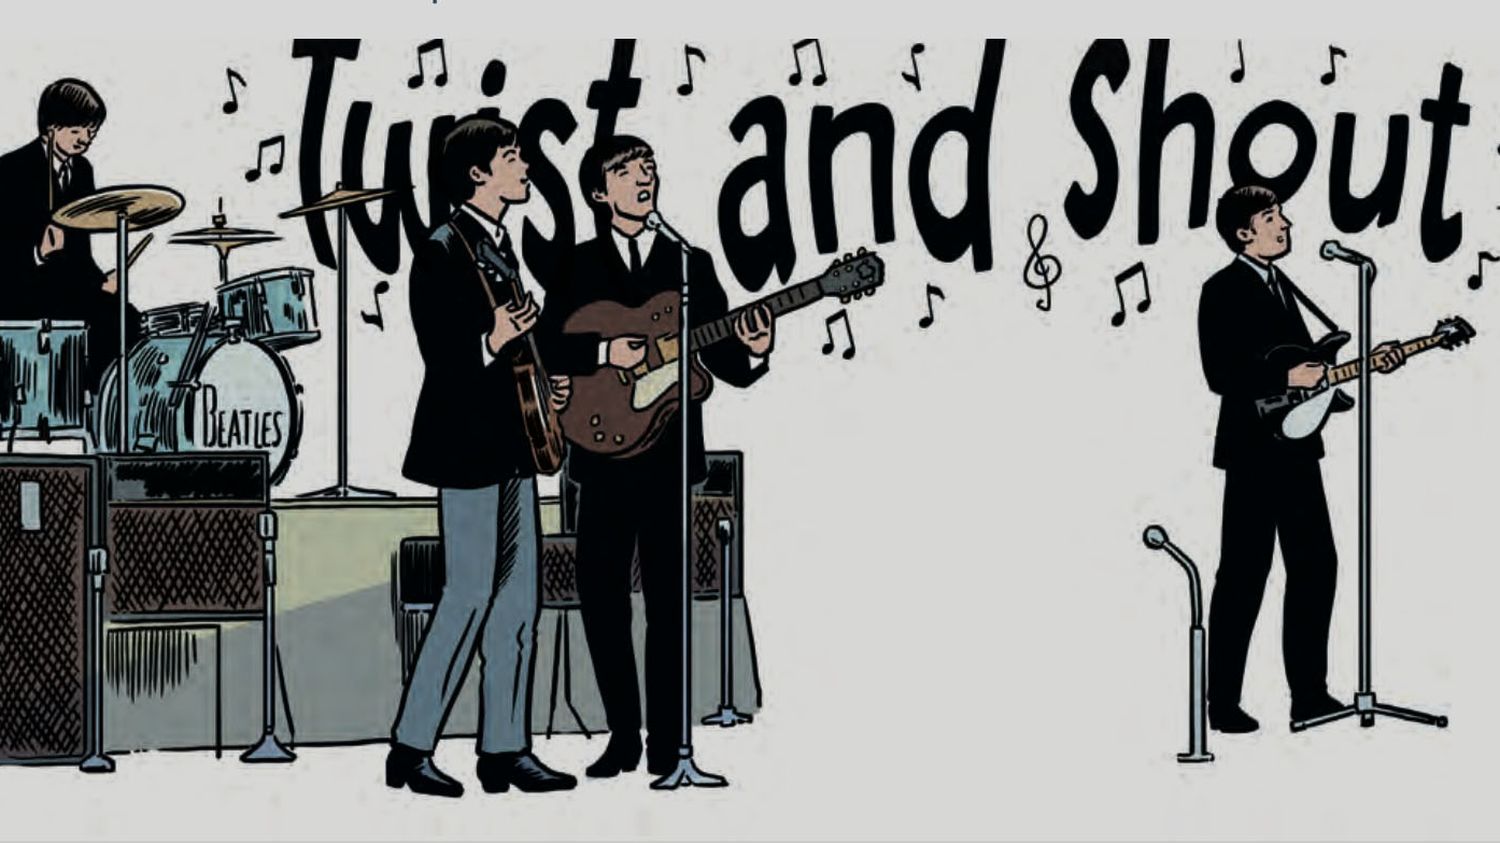 "The Beatles in Paris": the comic looks back at the three weeks of concerts in Olympia that changed everything